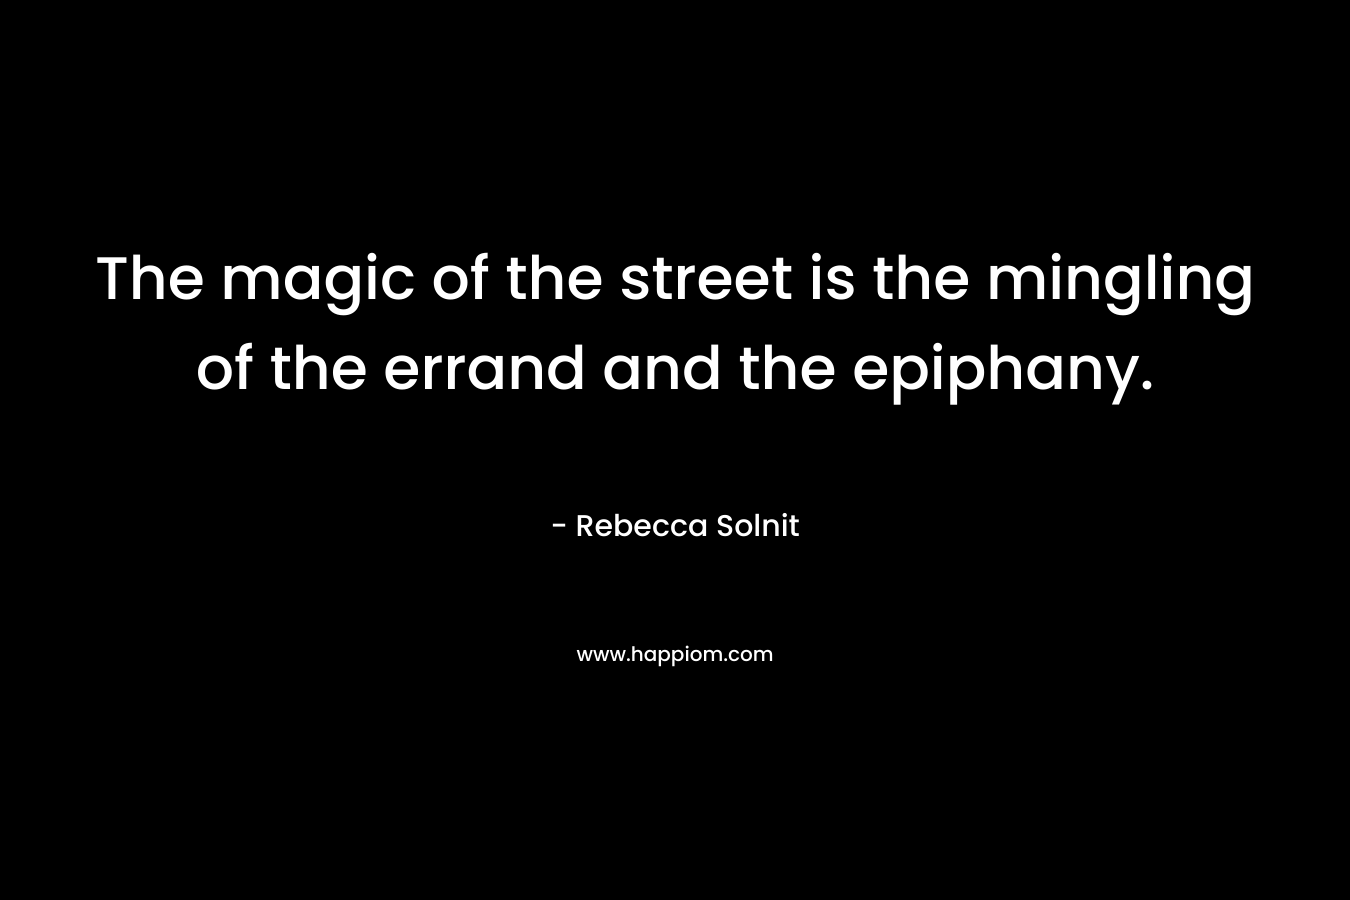 The magic of the street is the mingling of the errand and the epiphany.